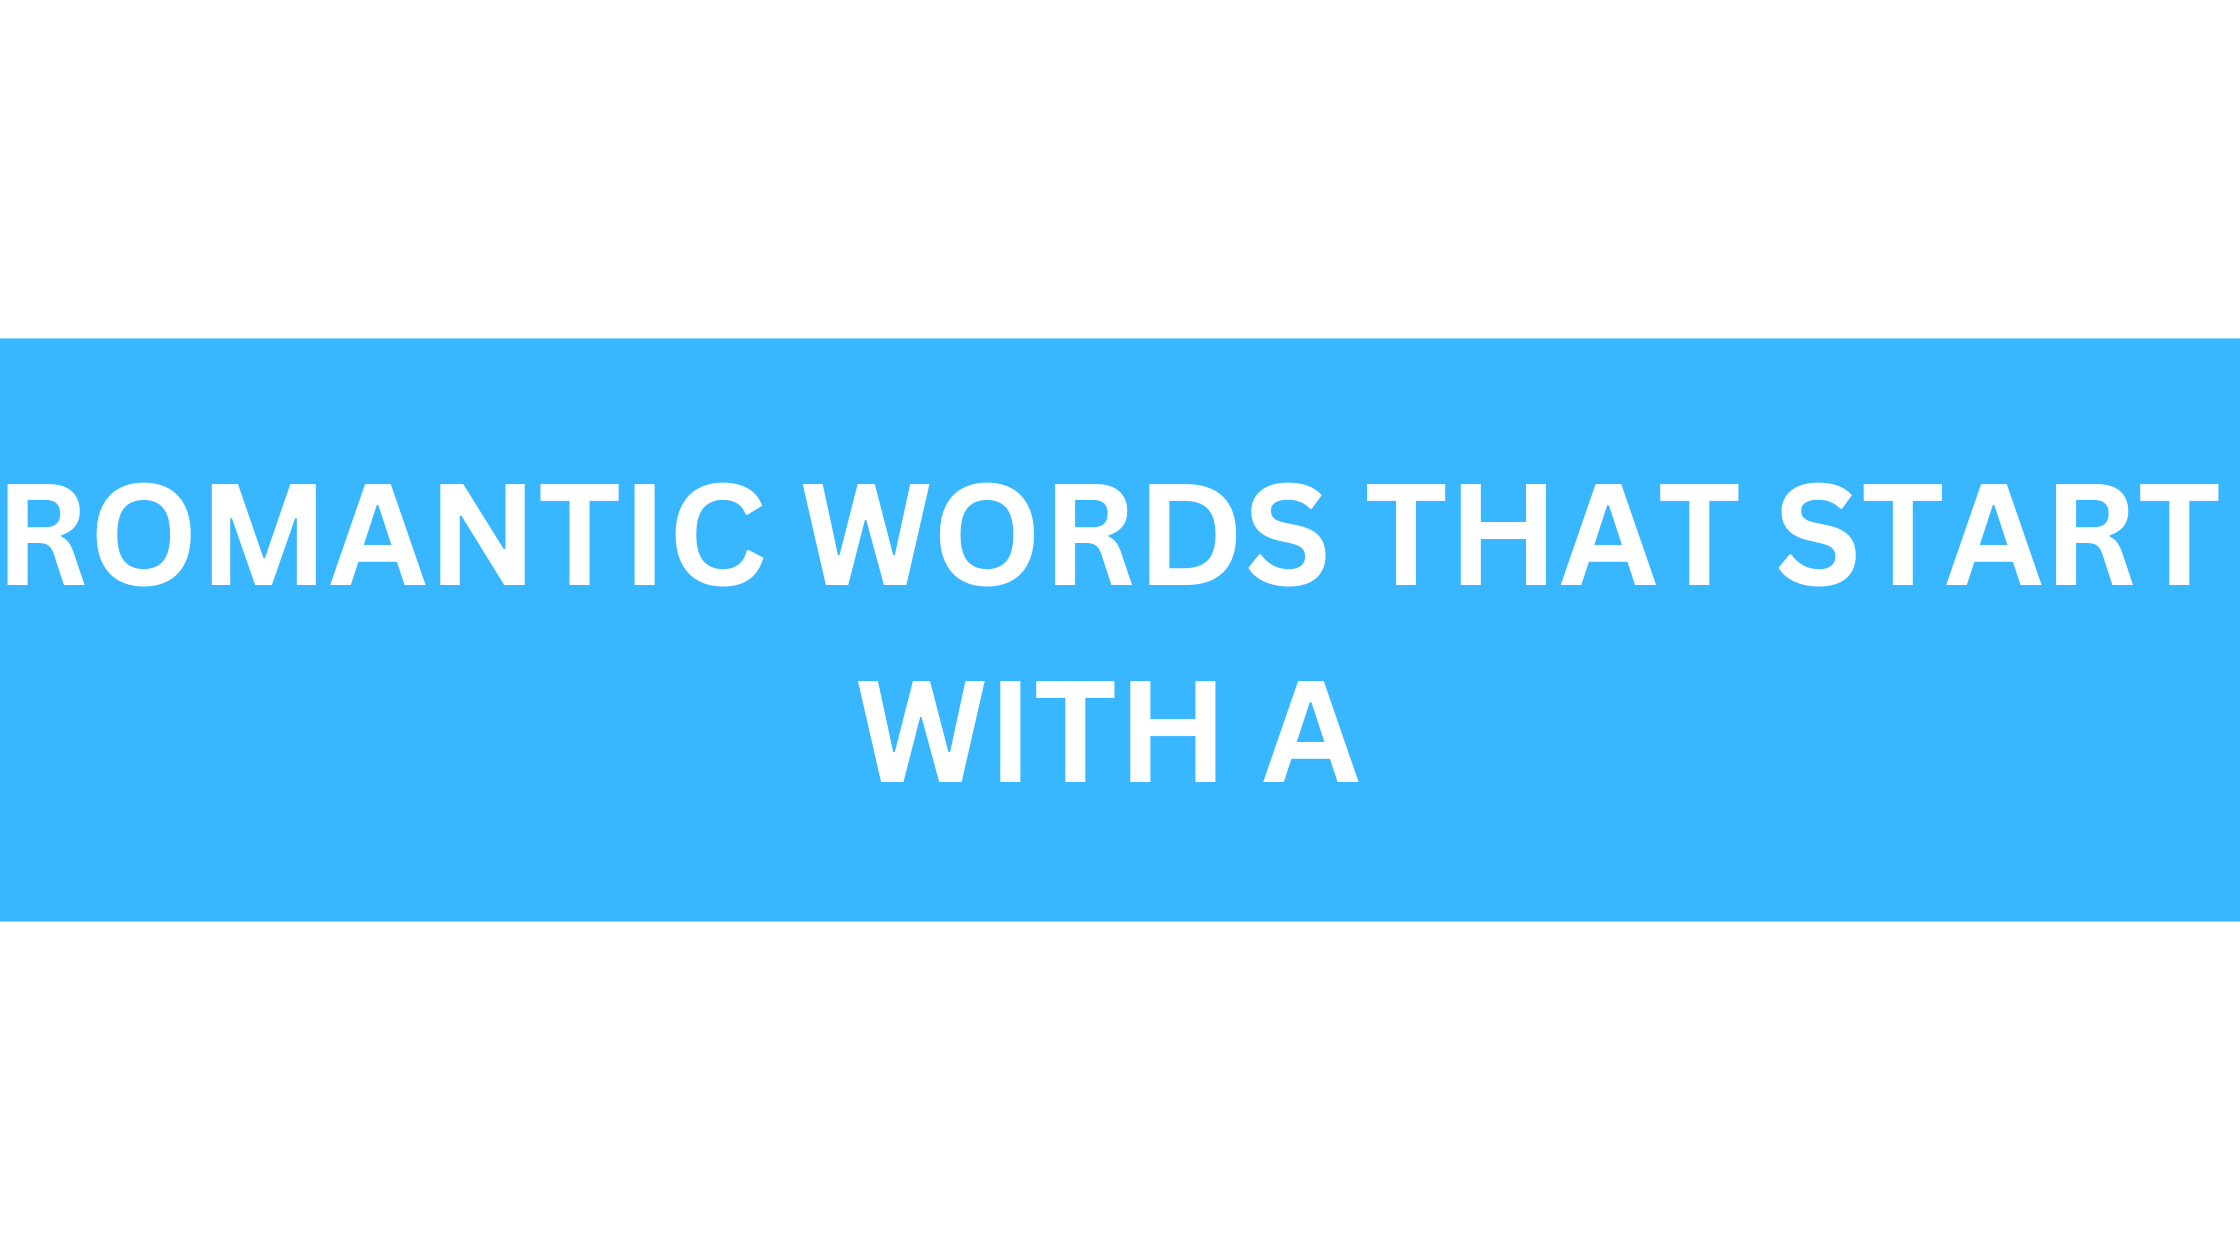 romantic words that start with a